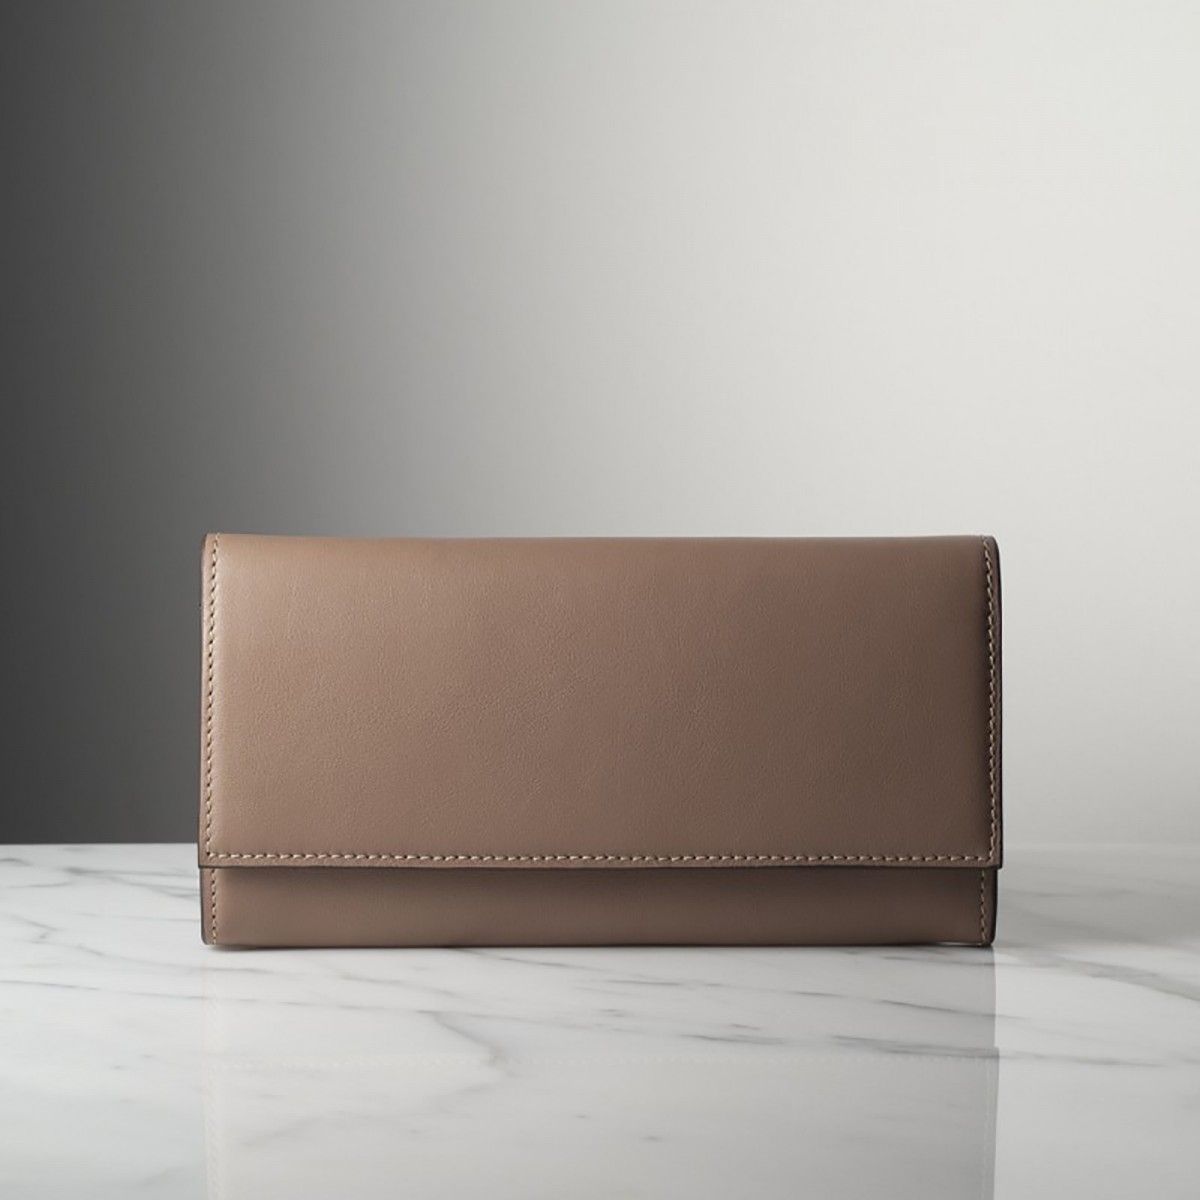 SUZANNE - Calfskin leather wallet, handmade in Italy